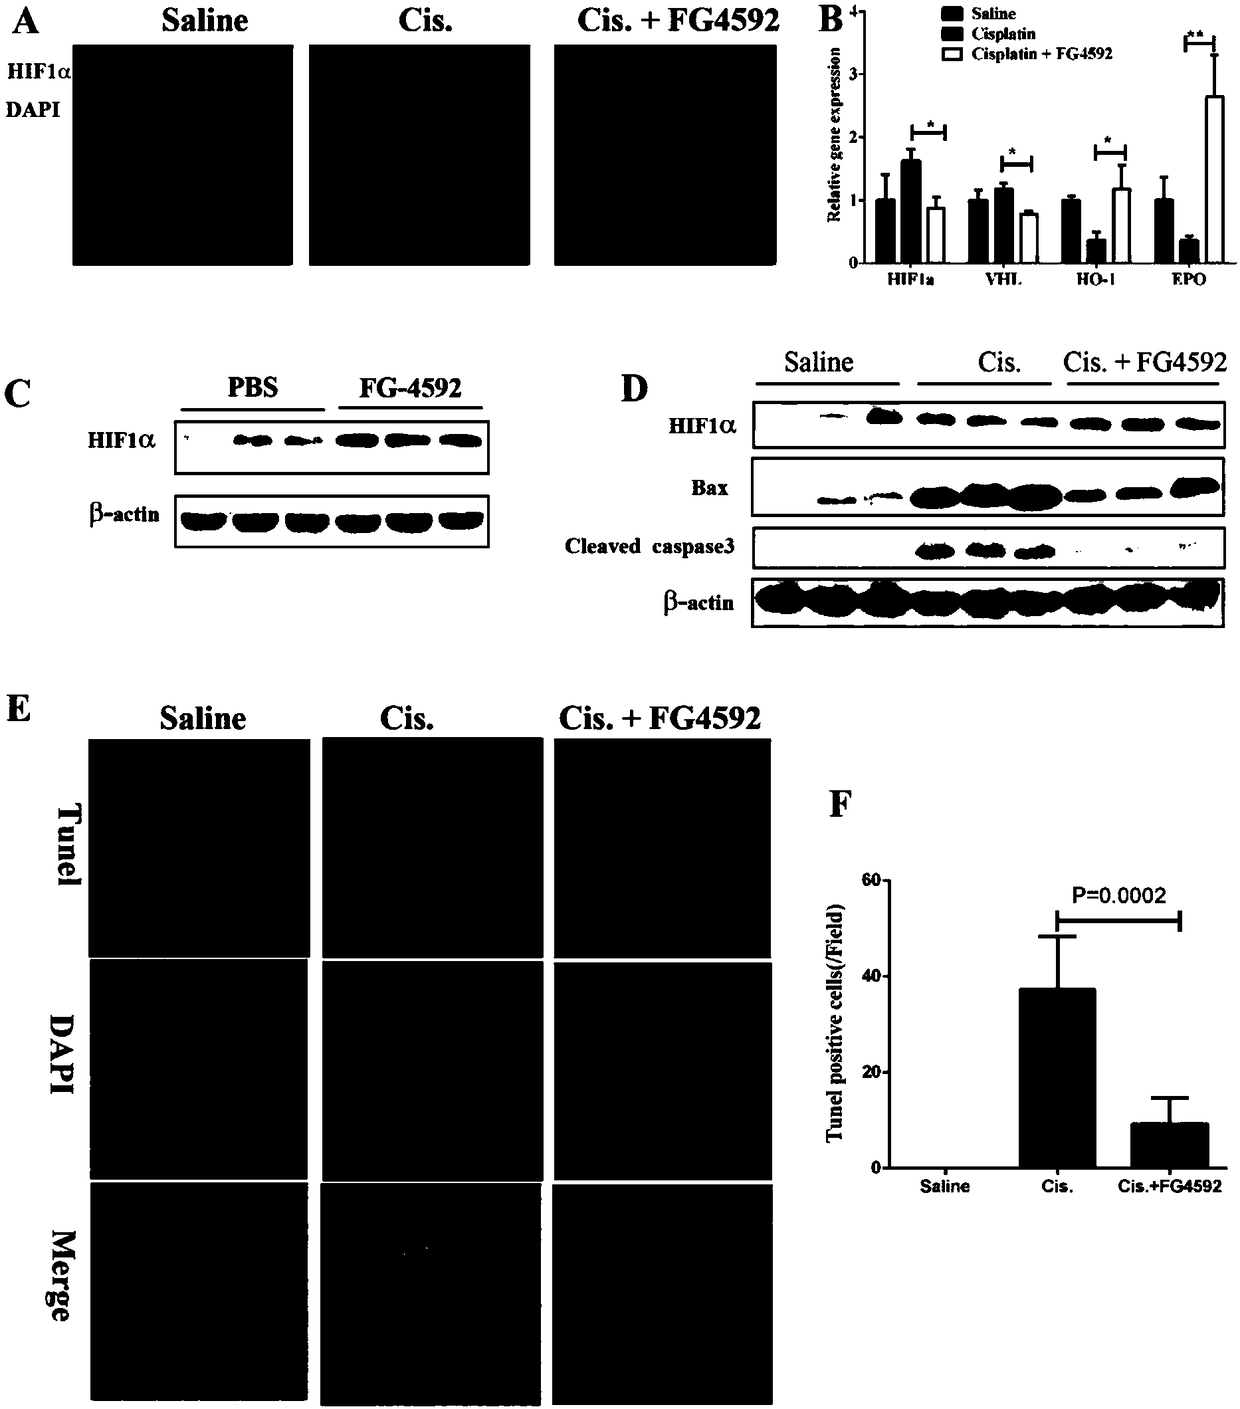 Application of hypoxia-inducible factor prolyl hydroxylase activity inhibitor in preparation of drug for preventing and treating acute kidney injury